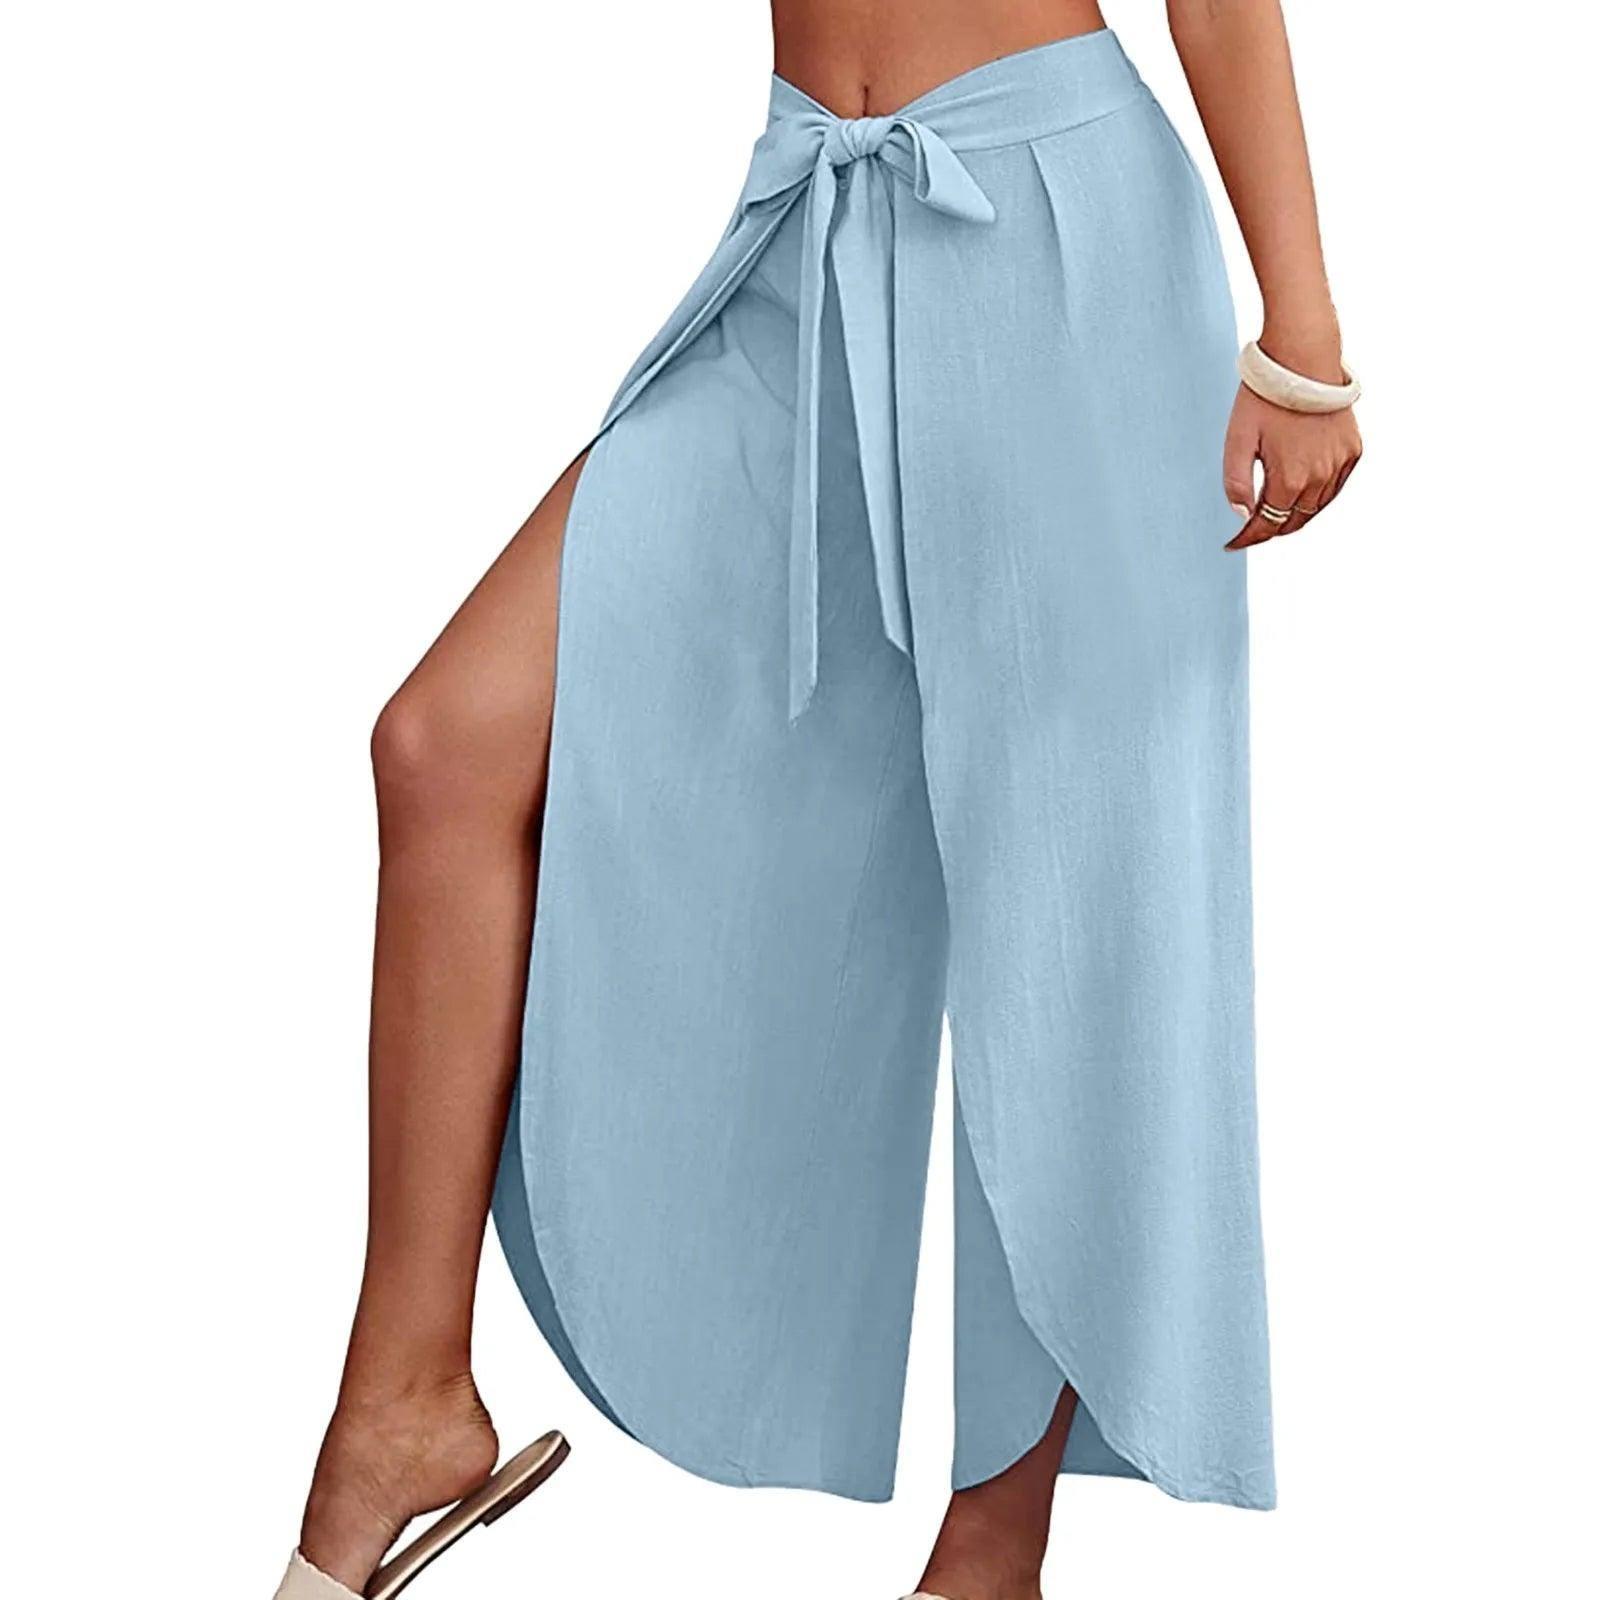 Women's Fashion Loose Casual Solid Color High Waist Flowy-Light Blue-11